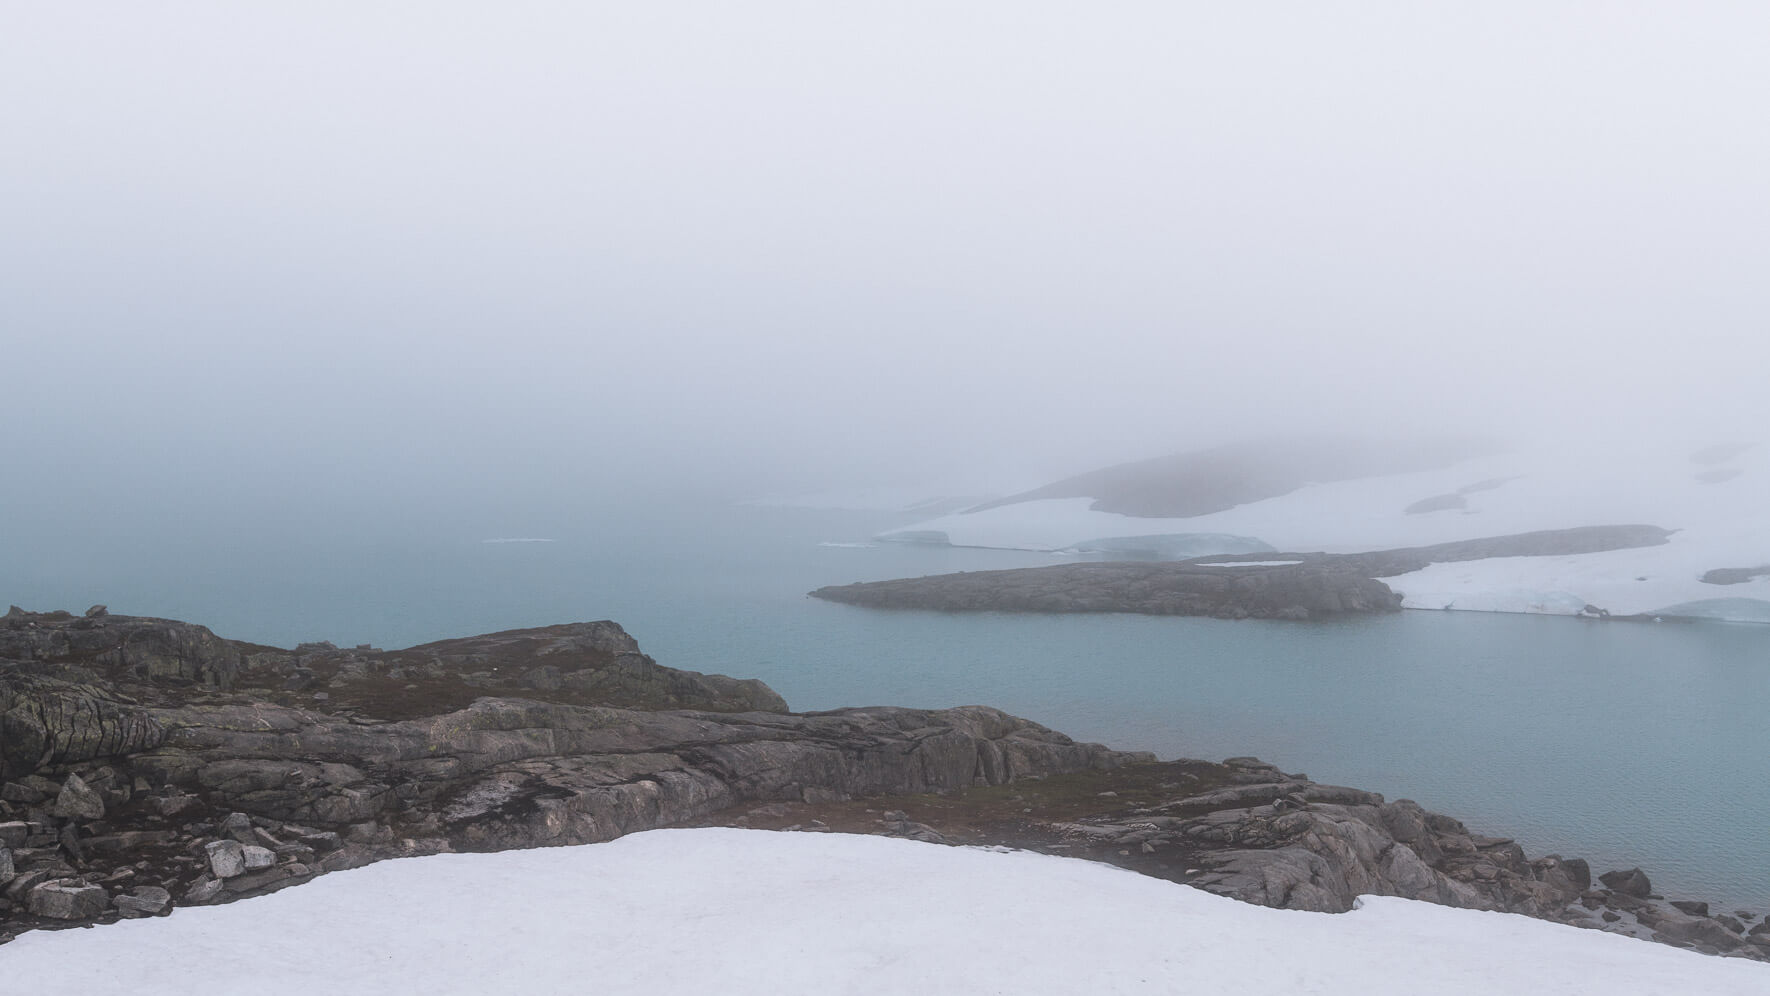 Landscape and fine art photography of Norway by Jan Erik Waider